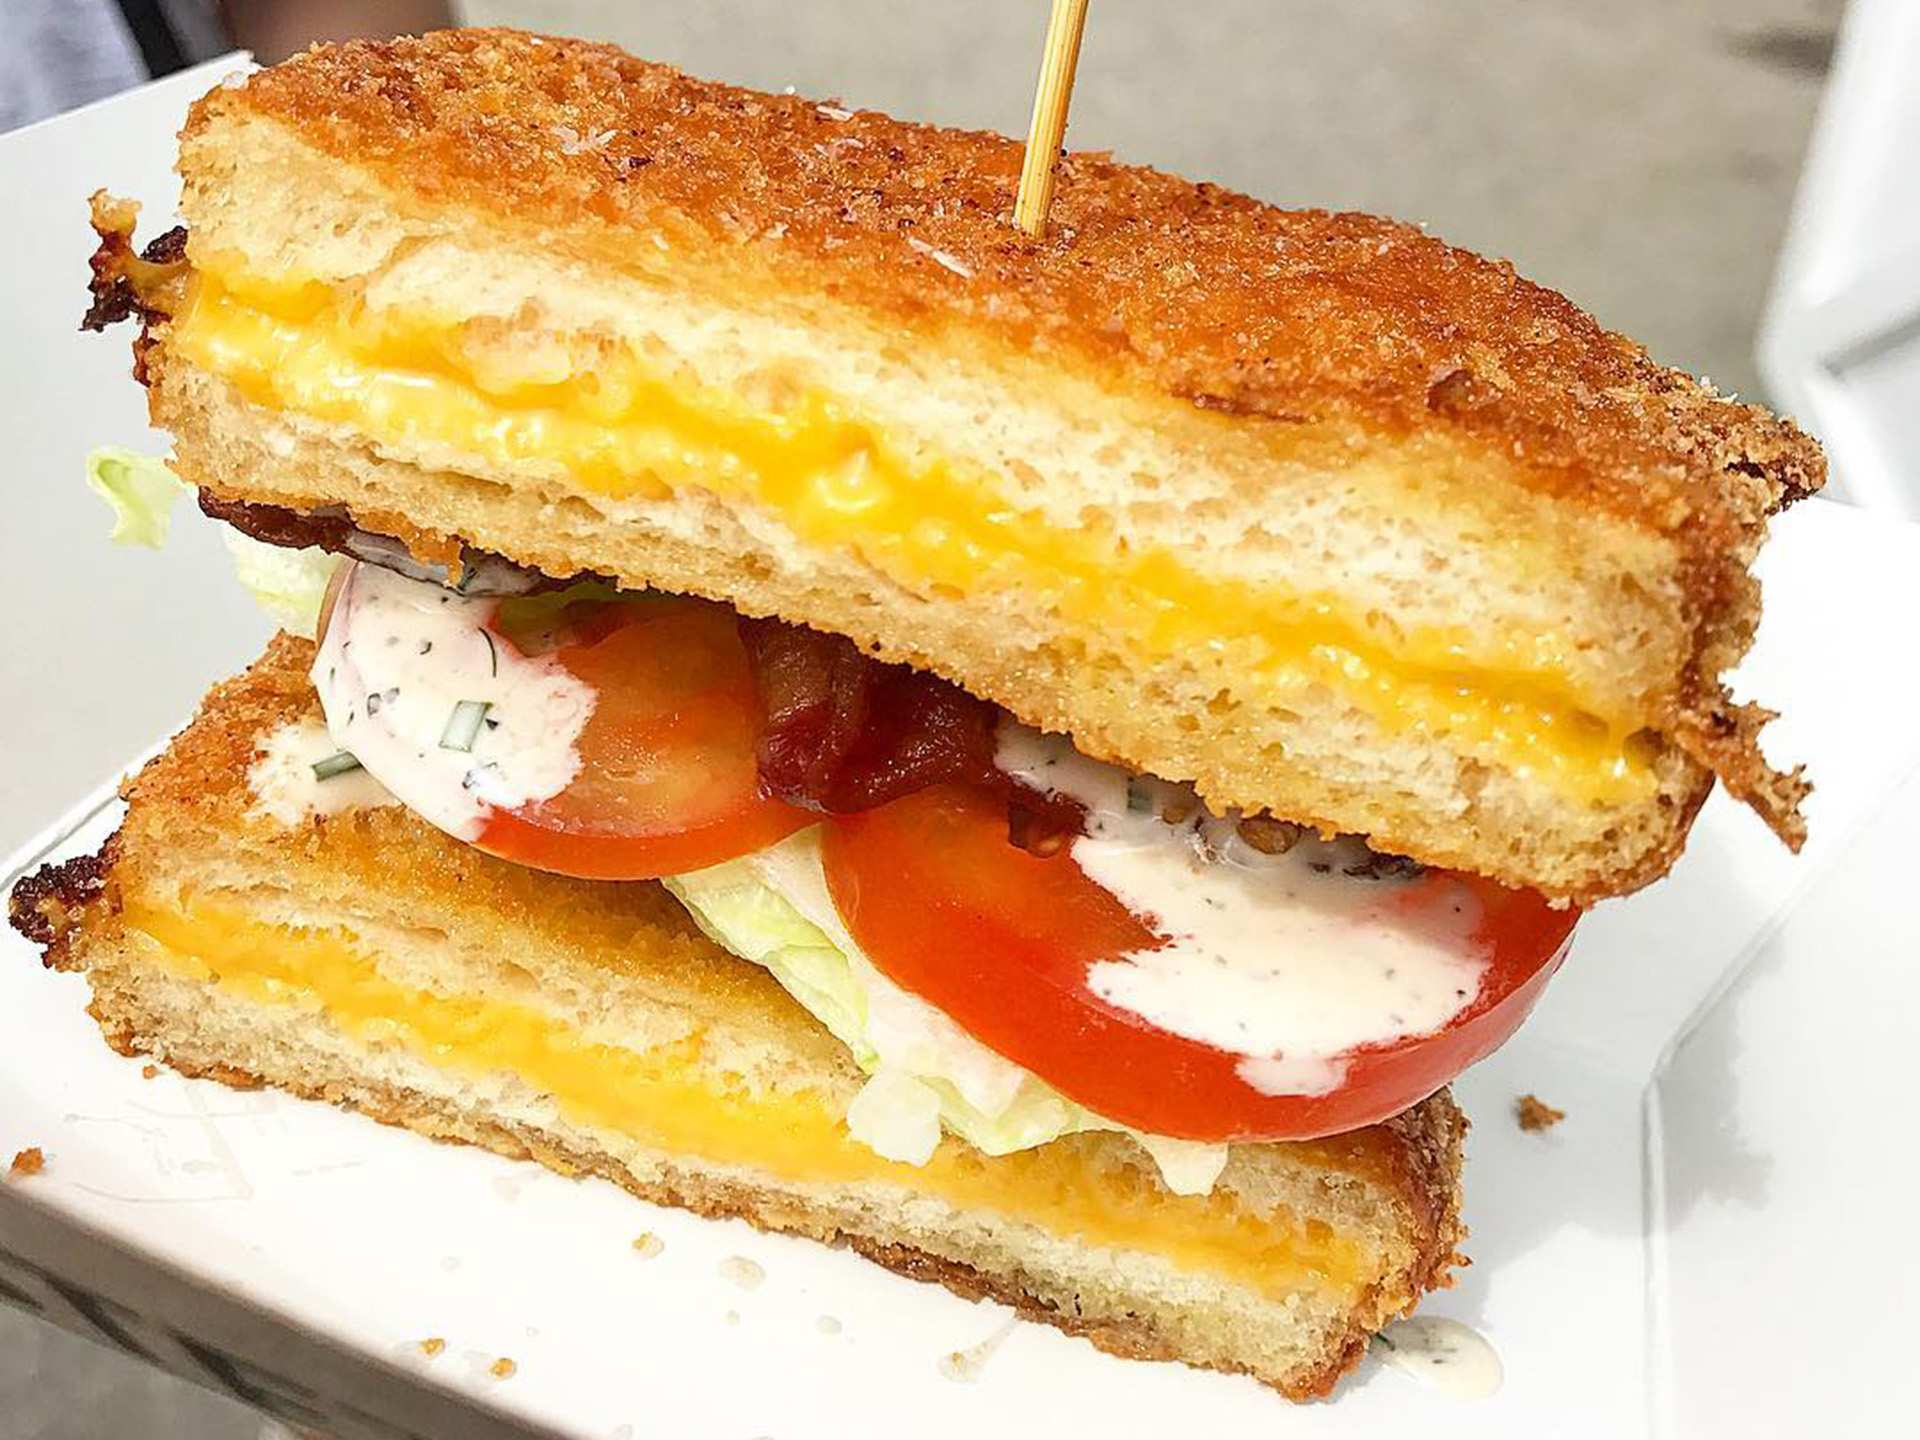 Brunch Fest | A grilled cheese sandwich with white cheese and tomatoes